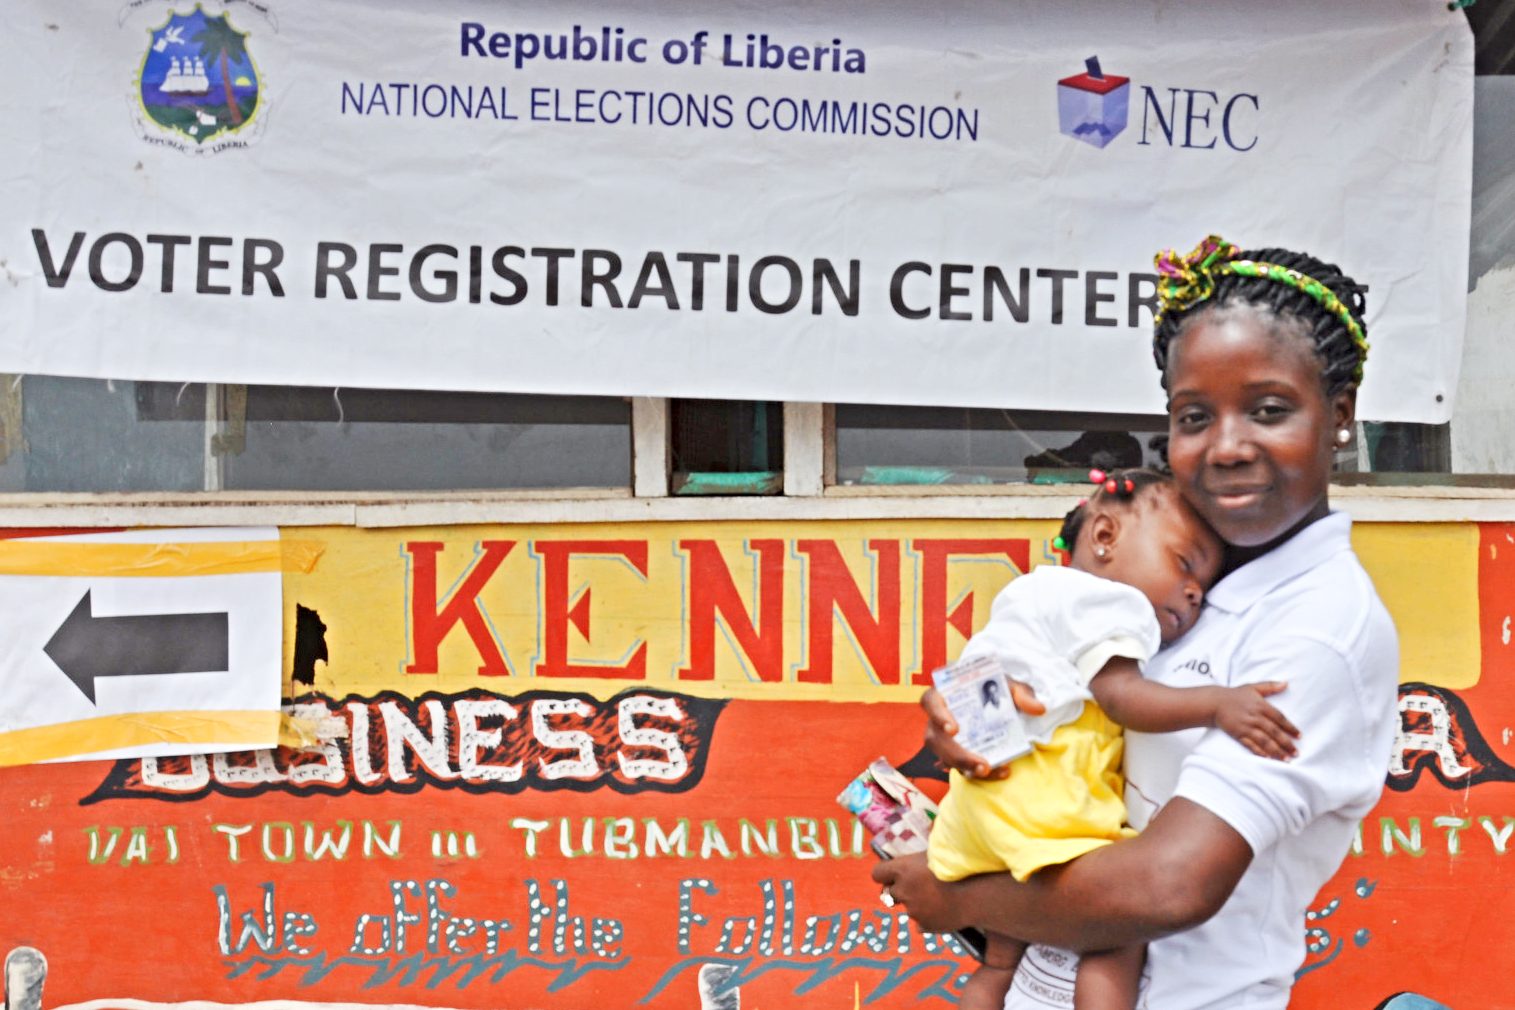 A young Liberian woman outside a voter registration center